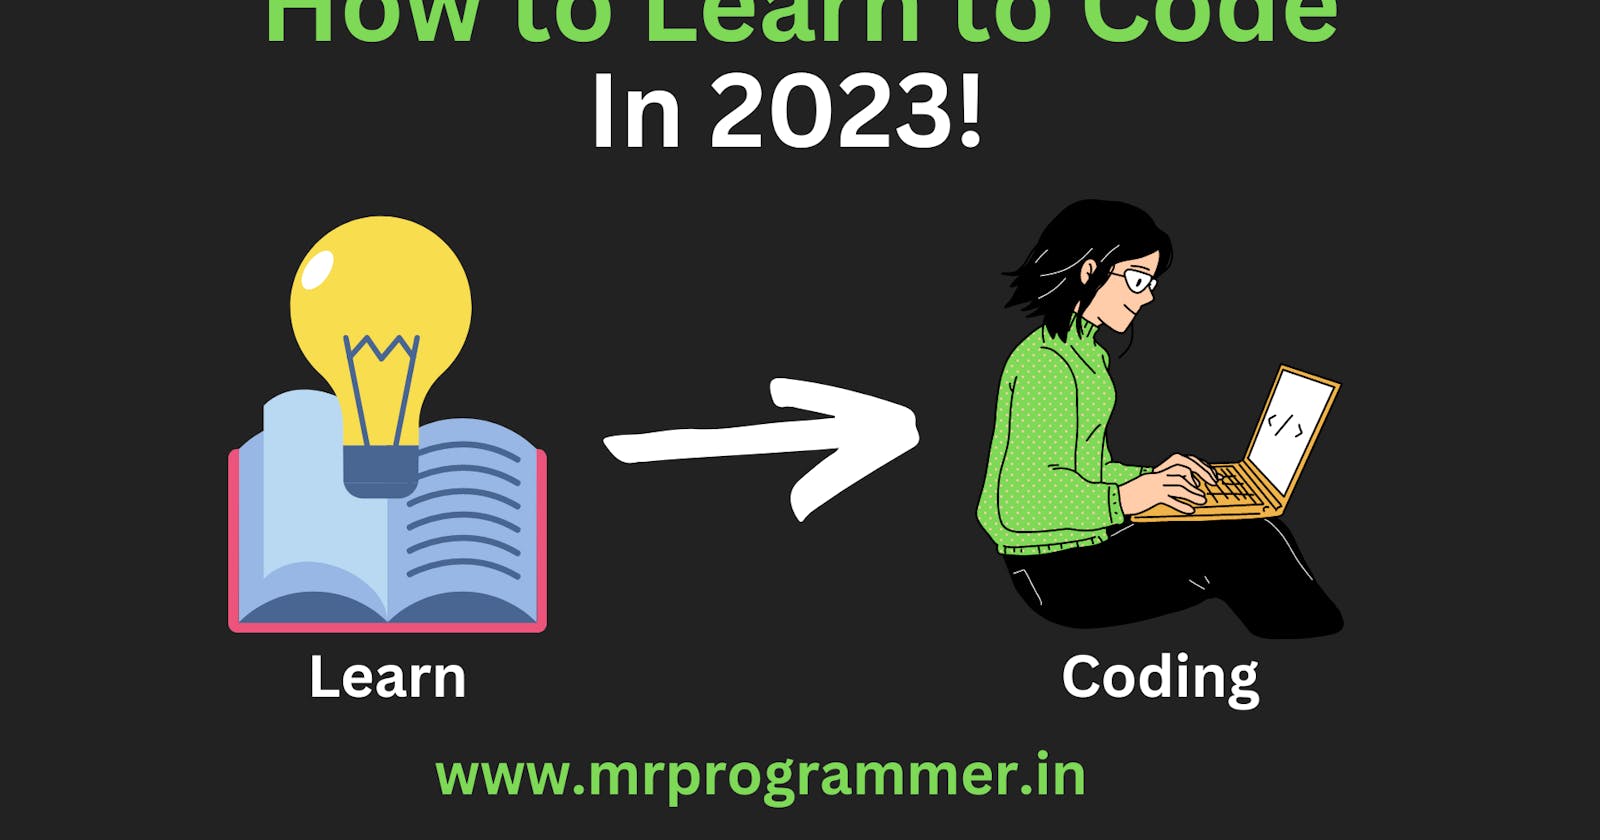 Here are some Tips That Will Keep You Motivated When Learning To Code As a Beginner In 2023